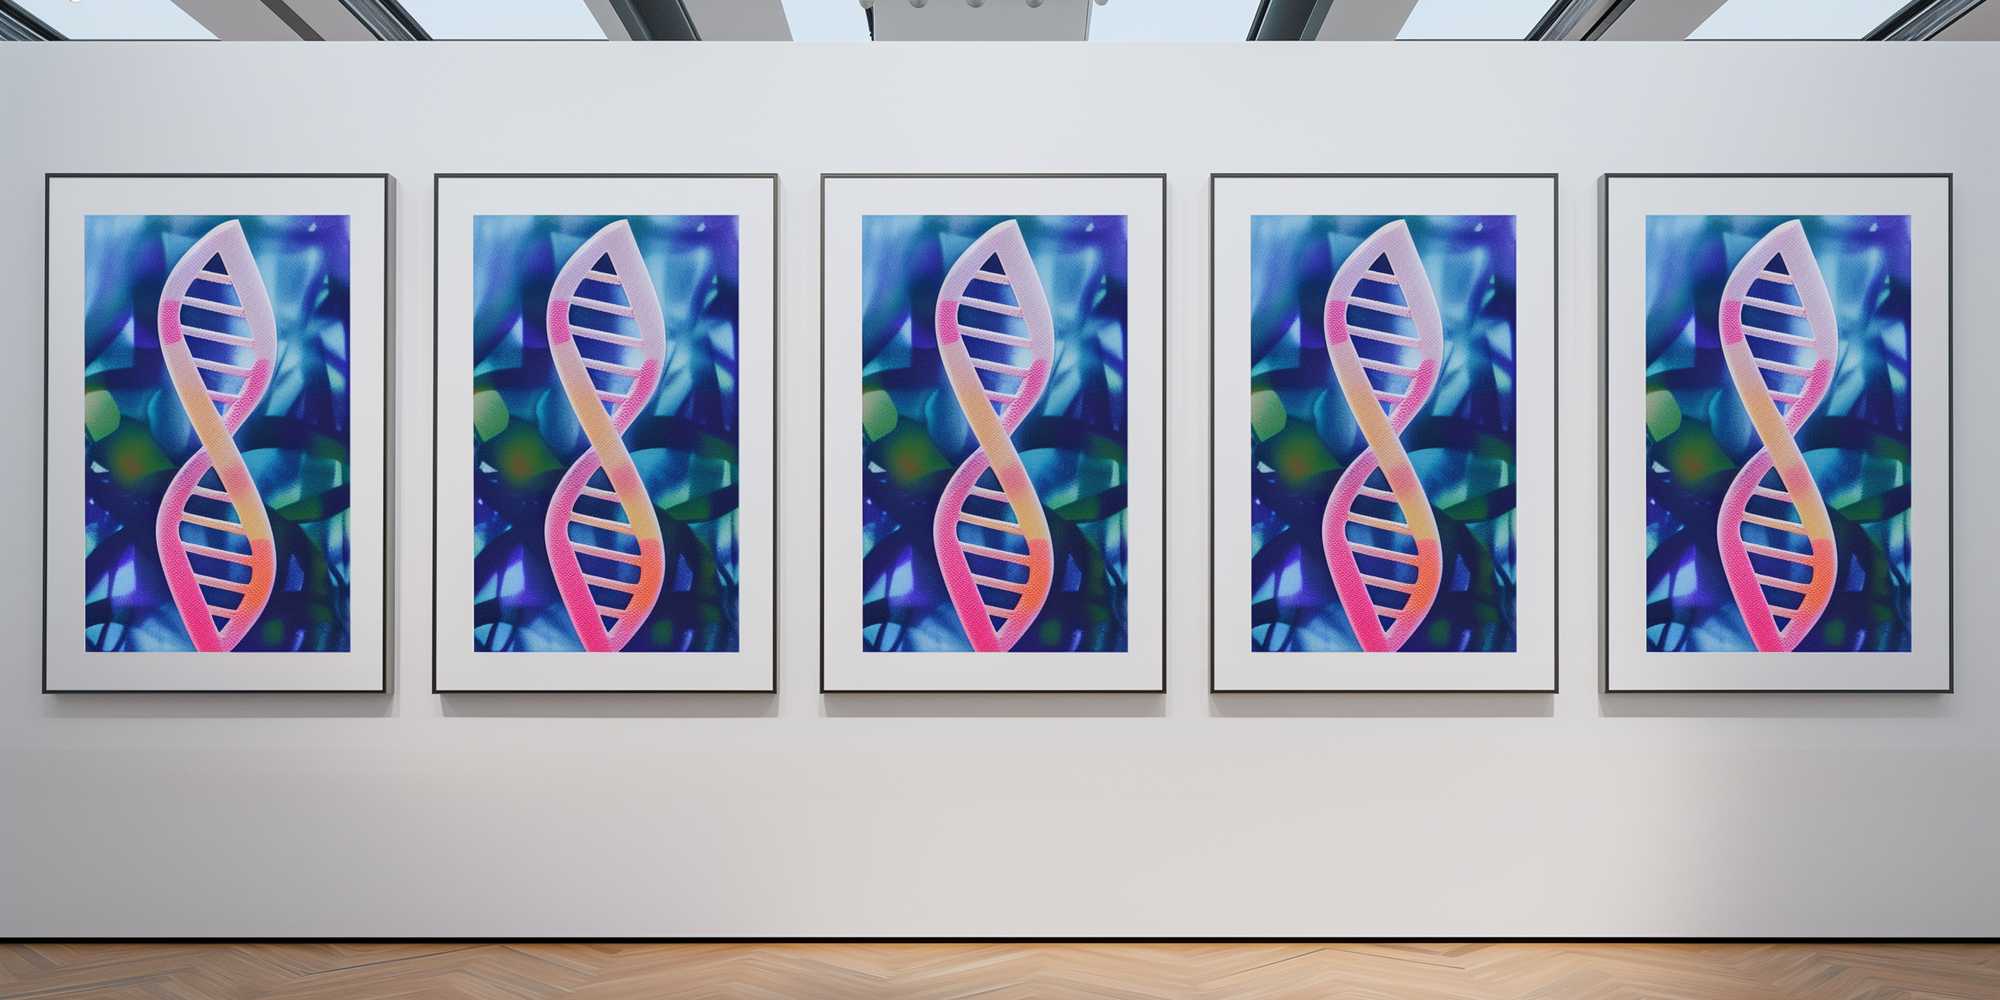 Five identical artworks showing a DNA double helix each.